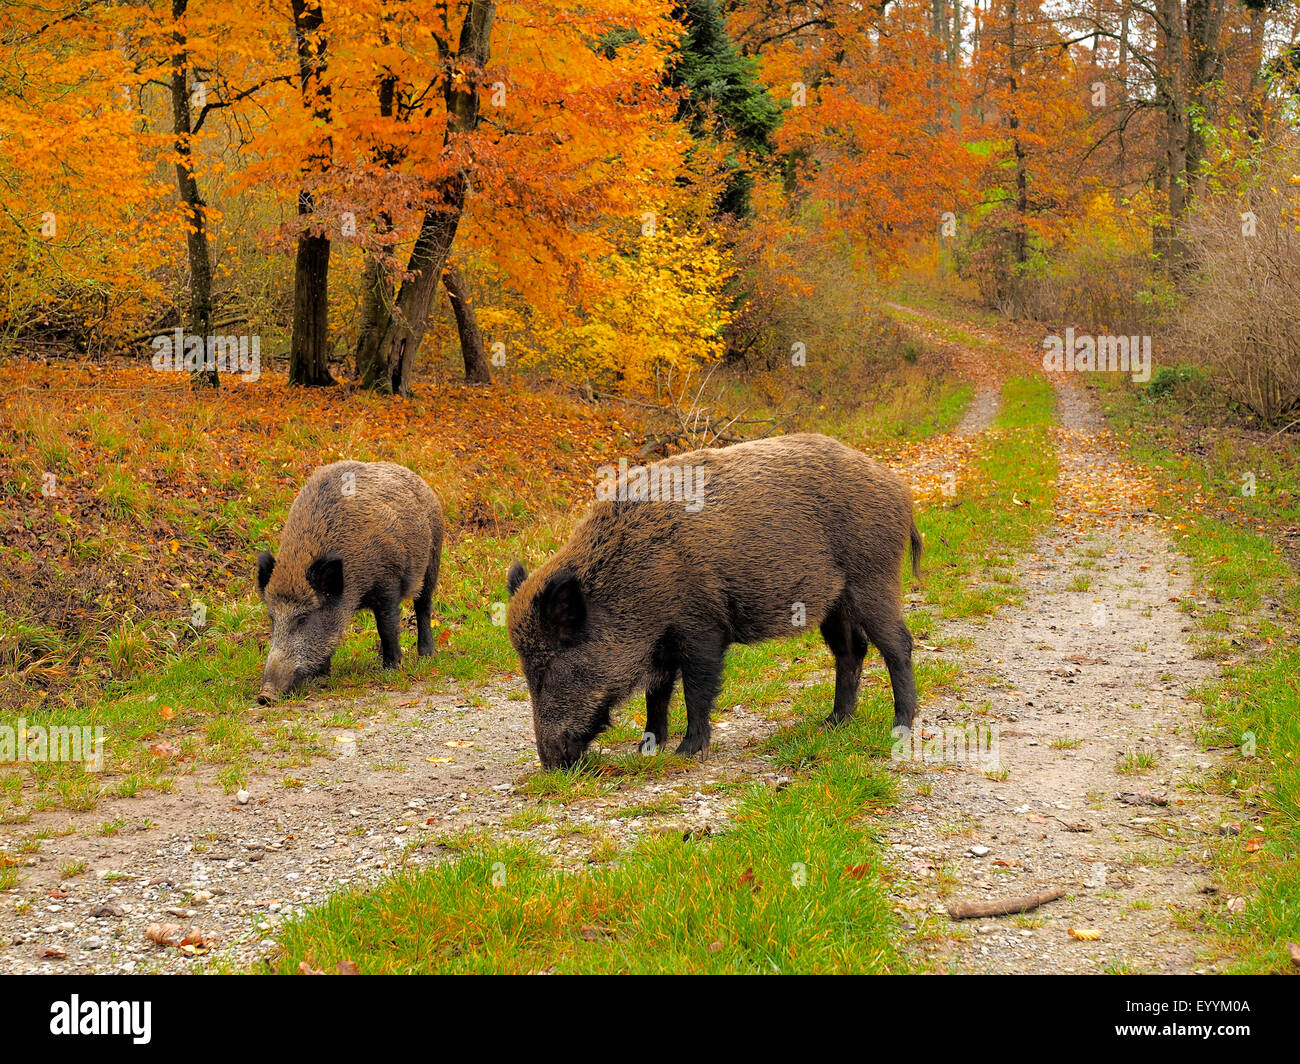 wild boar, pig, wild boar (Sus scrofa), two eating wild boars on a forest path in autumn, Germany, Baden-Wuerttemberg Stock Photo